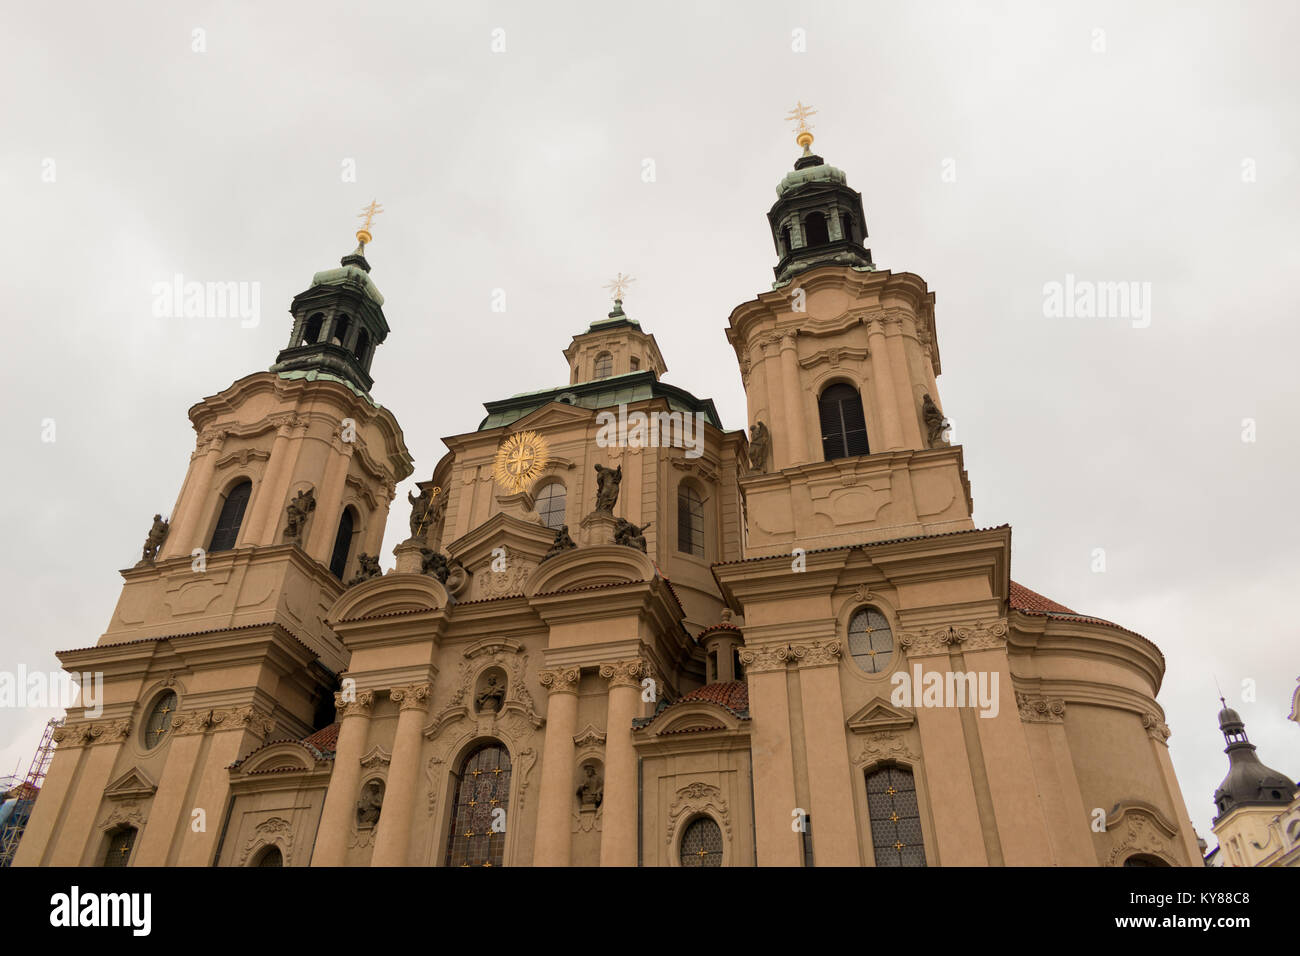 St. Nicholas Church in Old Town Square, Prague Stock Photo